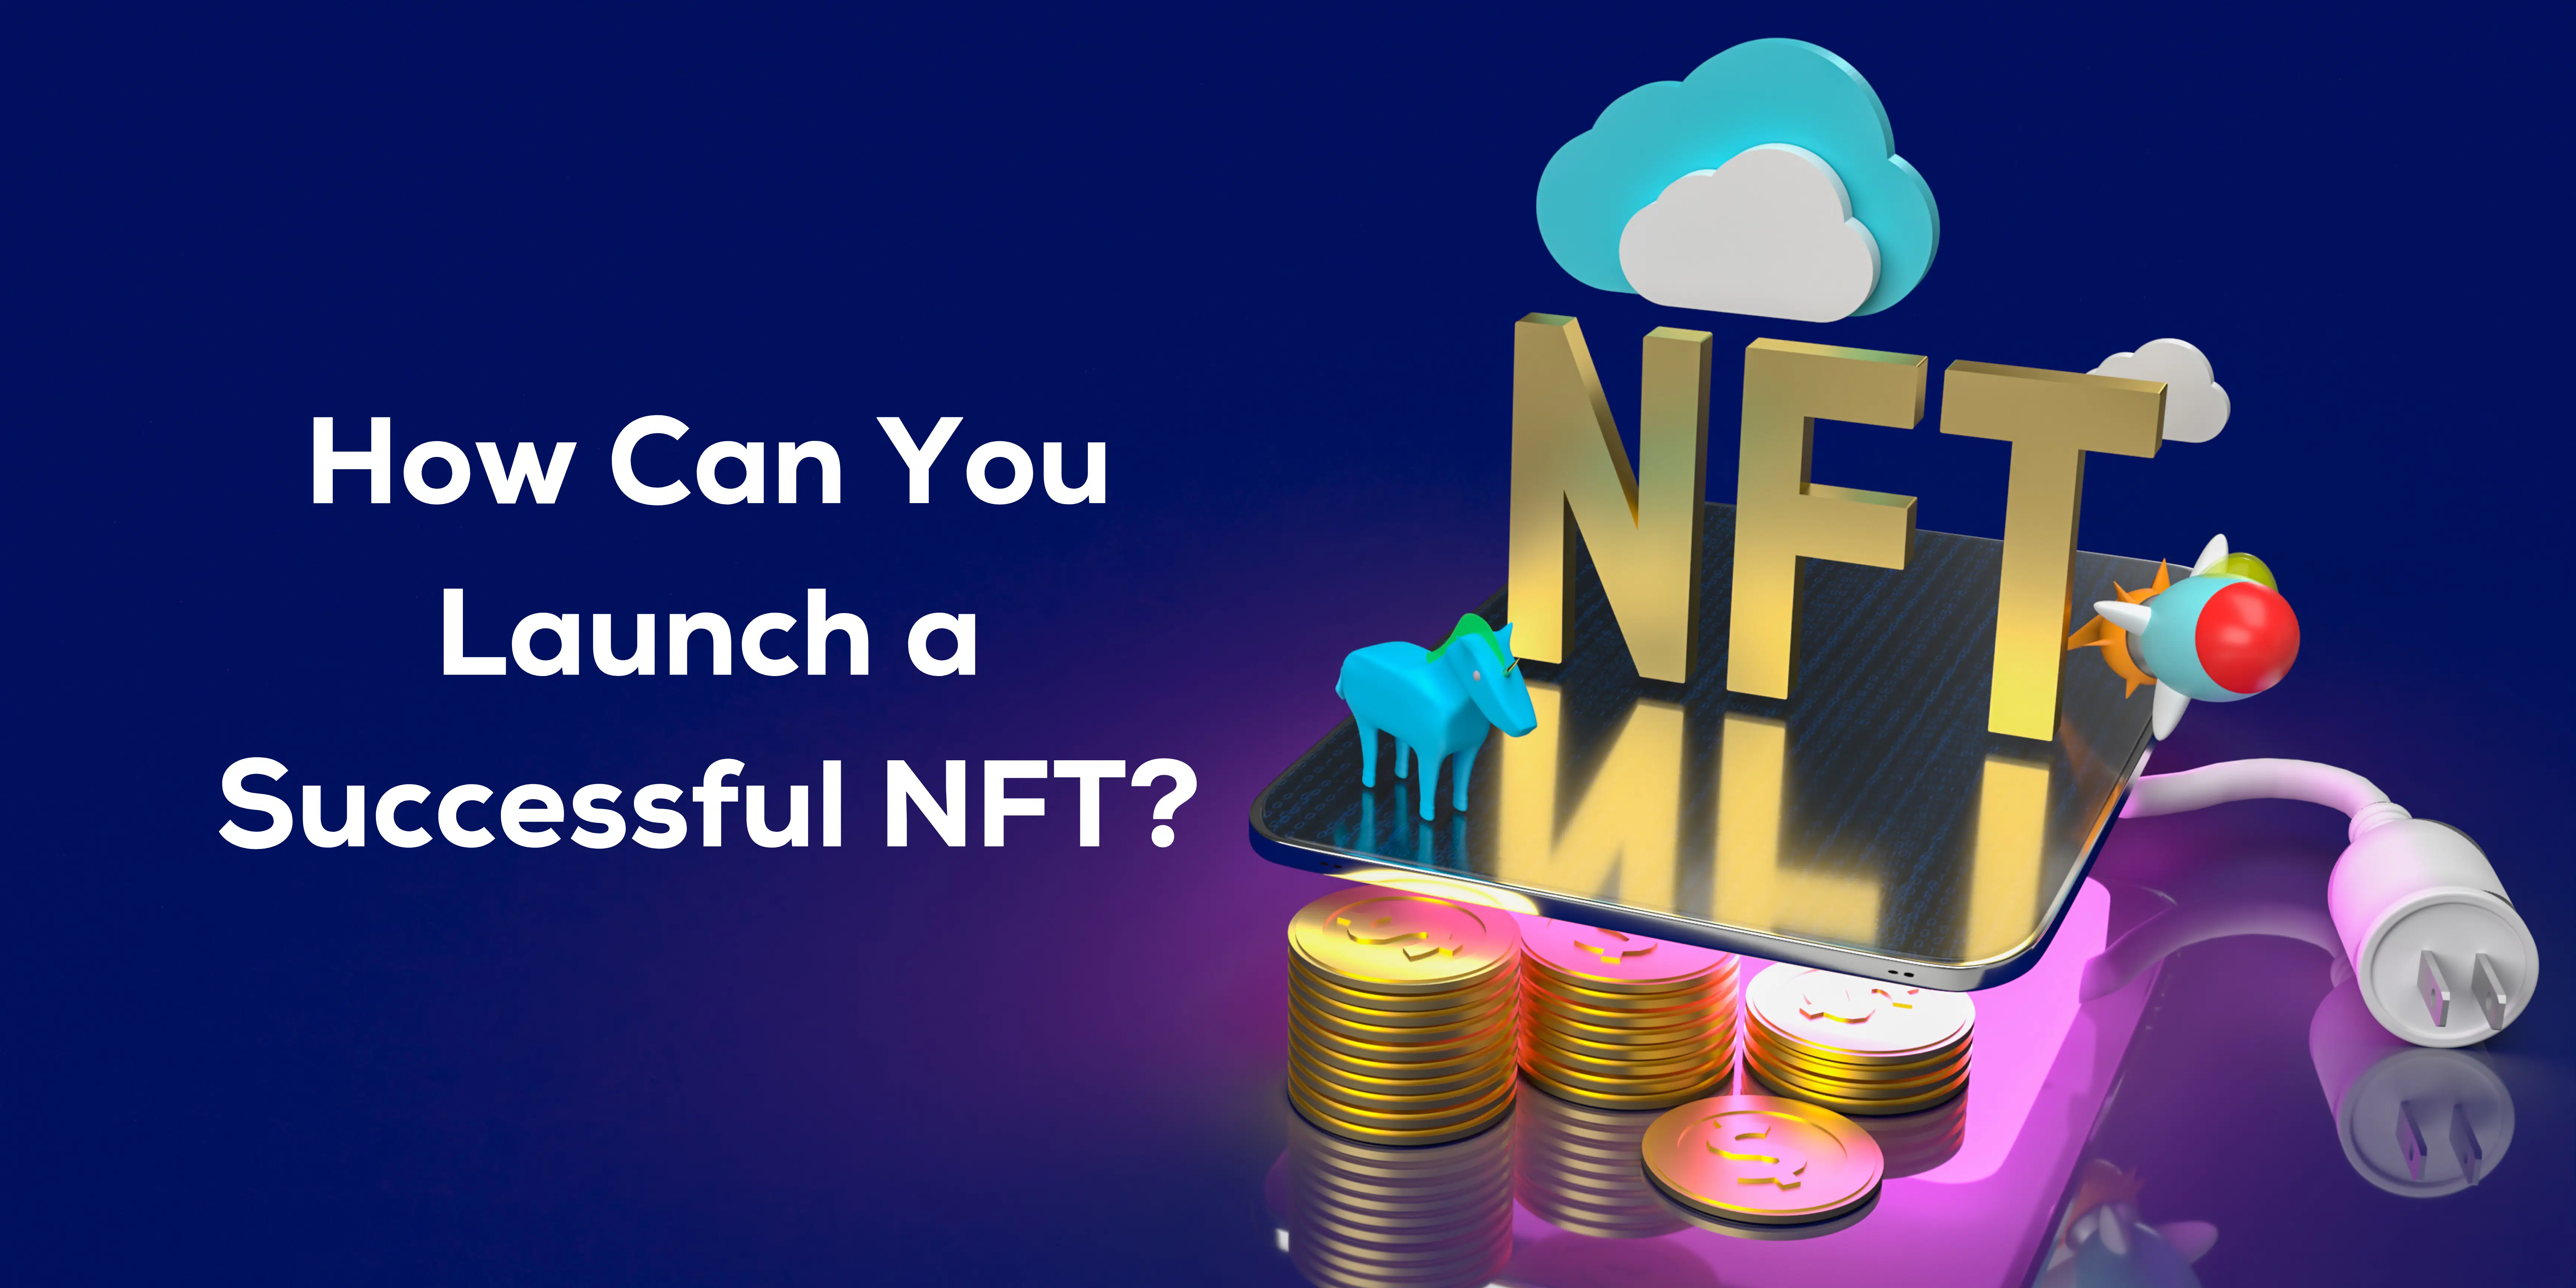 How Can You Launch a Successful NFT